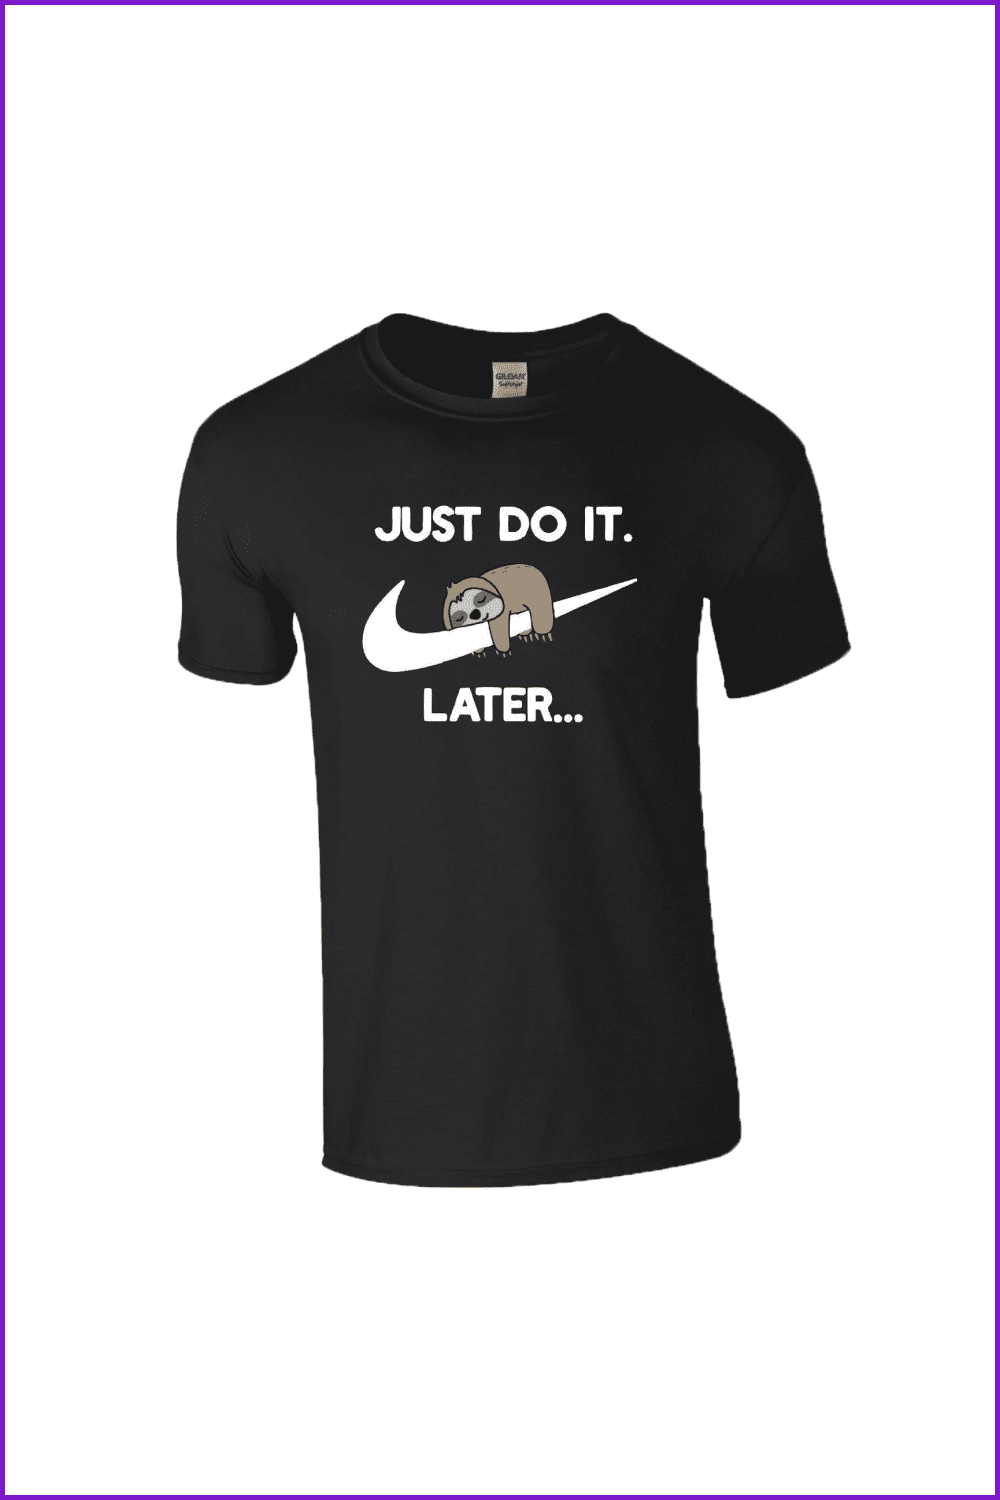 Lazy Sloth Funny T-Shirt Gym Workout Just Do It Later Slogan.